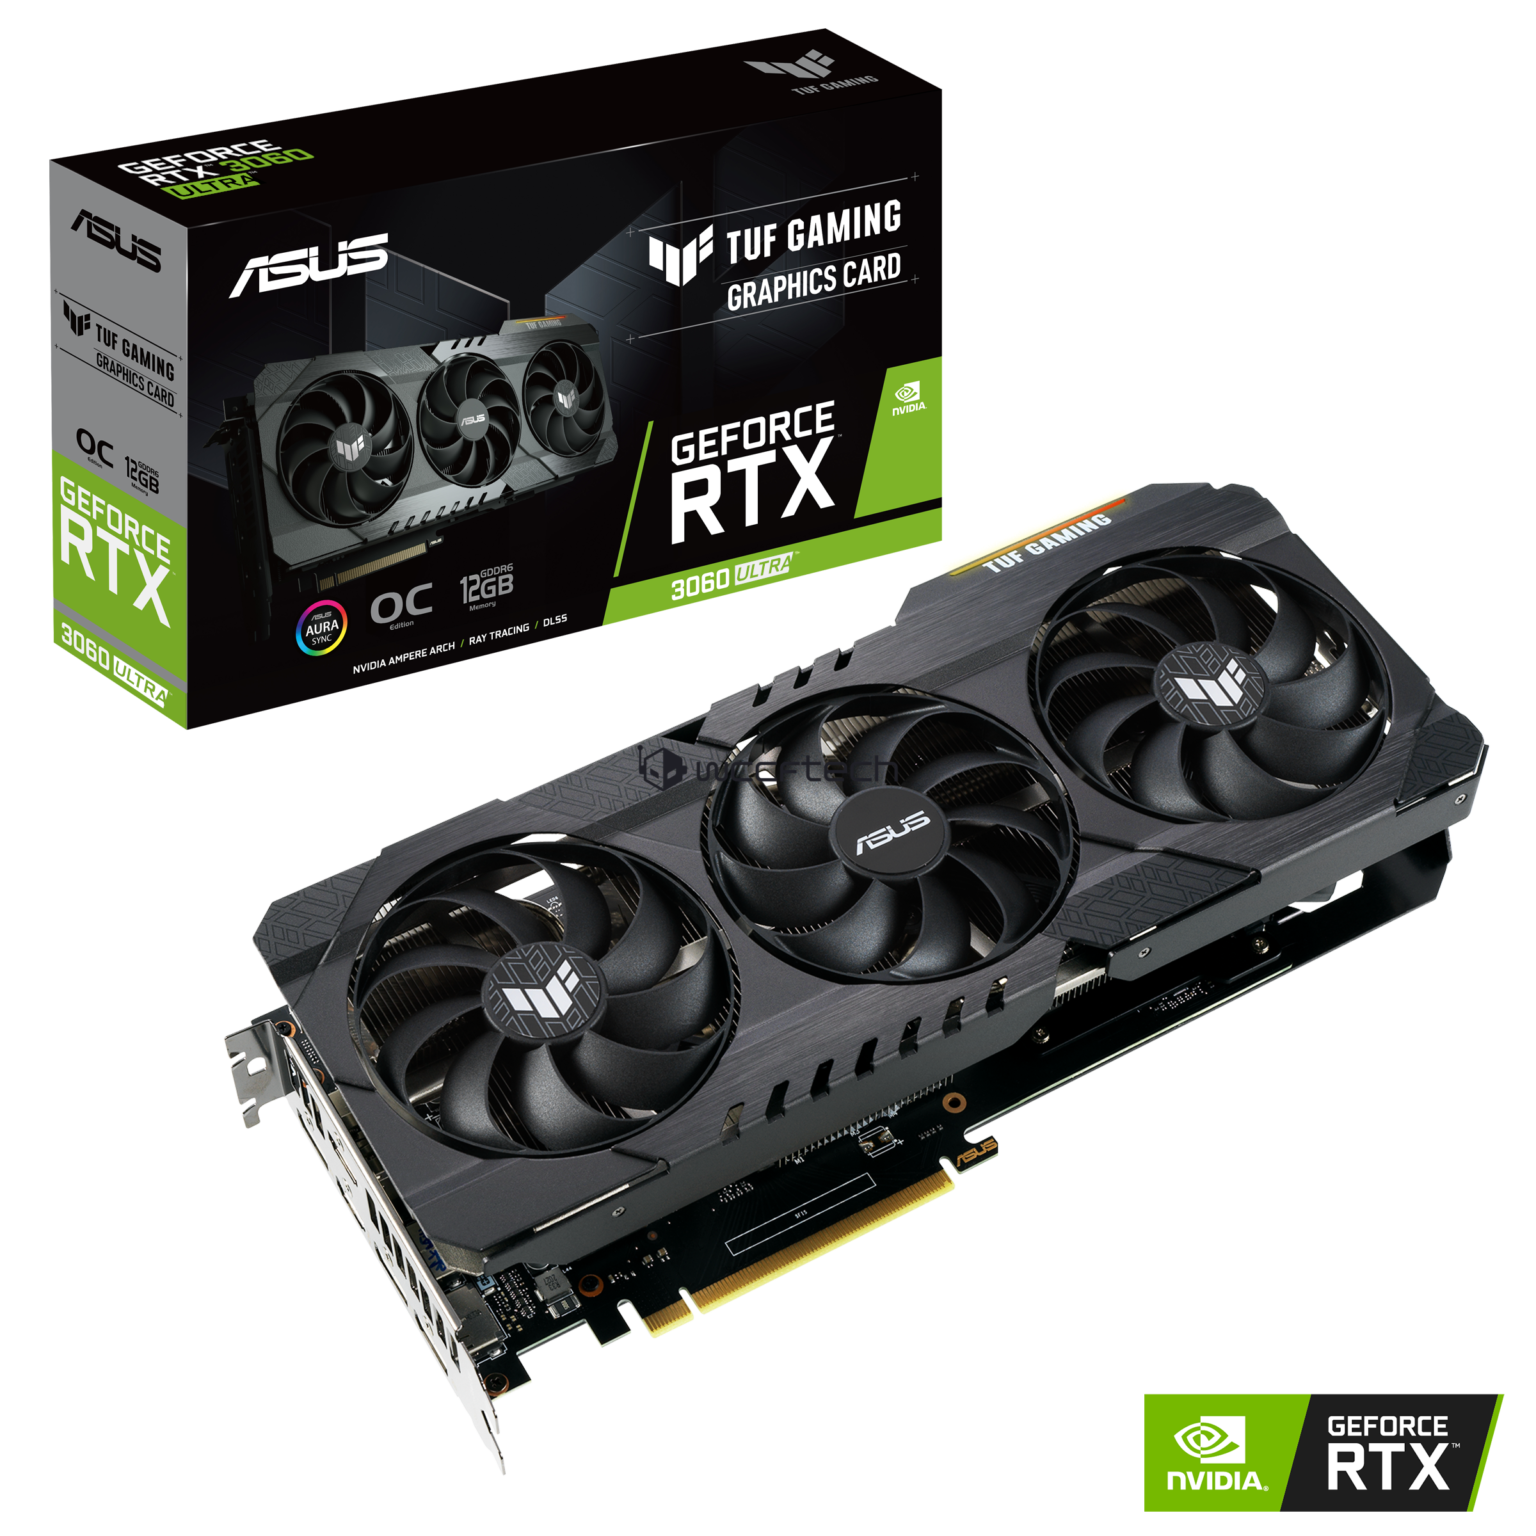 ASUS-GeForce-RTX-3060-Ultra-12-GB-GDDR6-Graphics-Card-Pictured-1-1536x1536.png